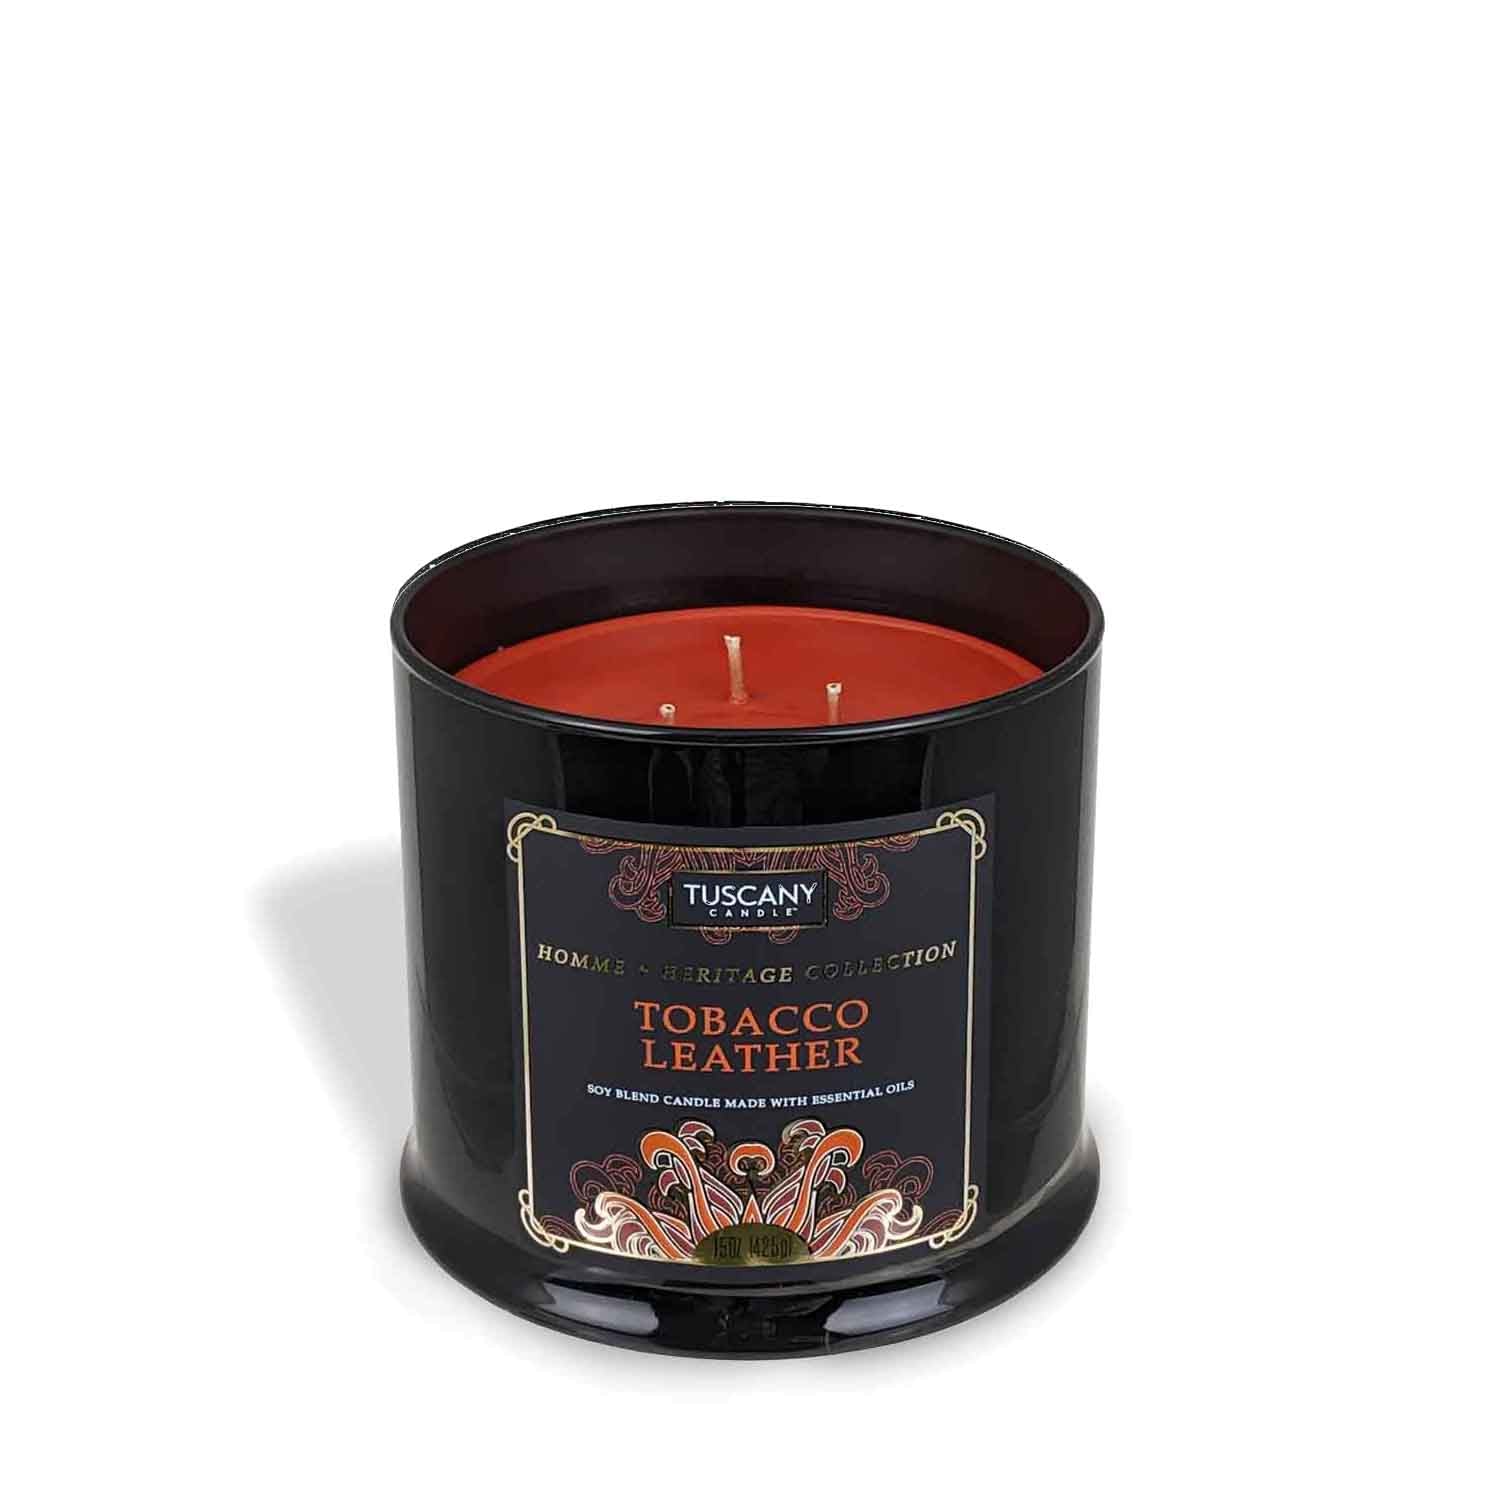 A Tobacco Leather Scented Jar Candle (15 oz) – Homme + Heritage Collection by Tuscany Candle with a tobacco leather design.